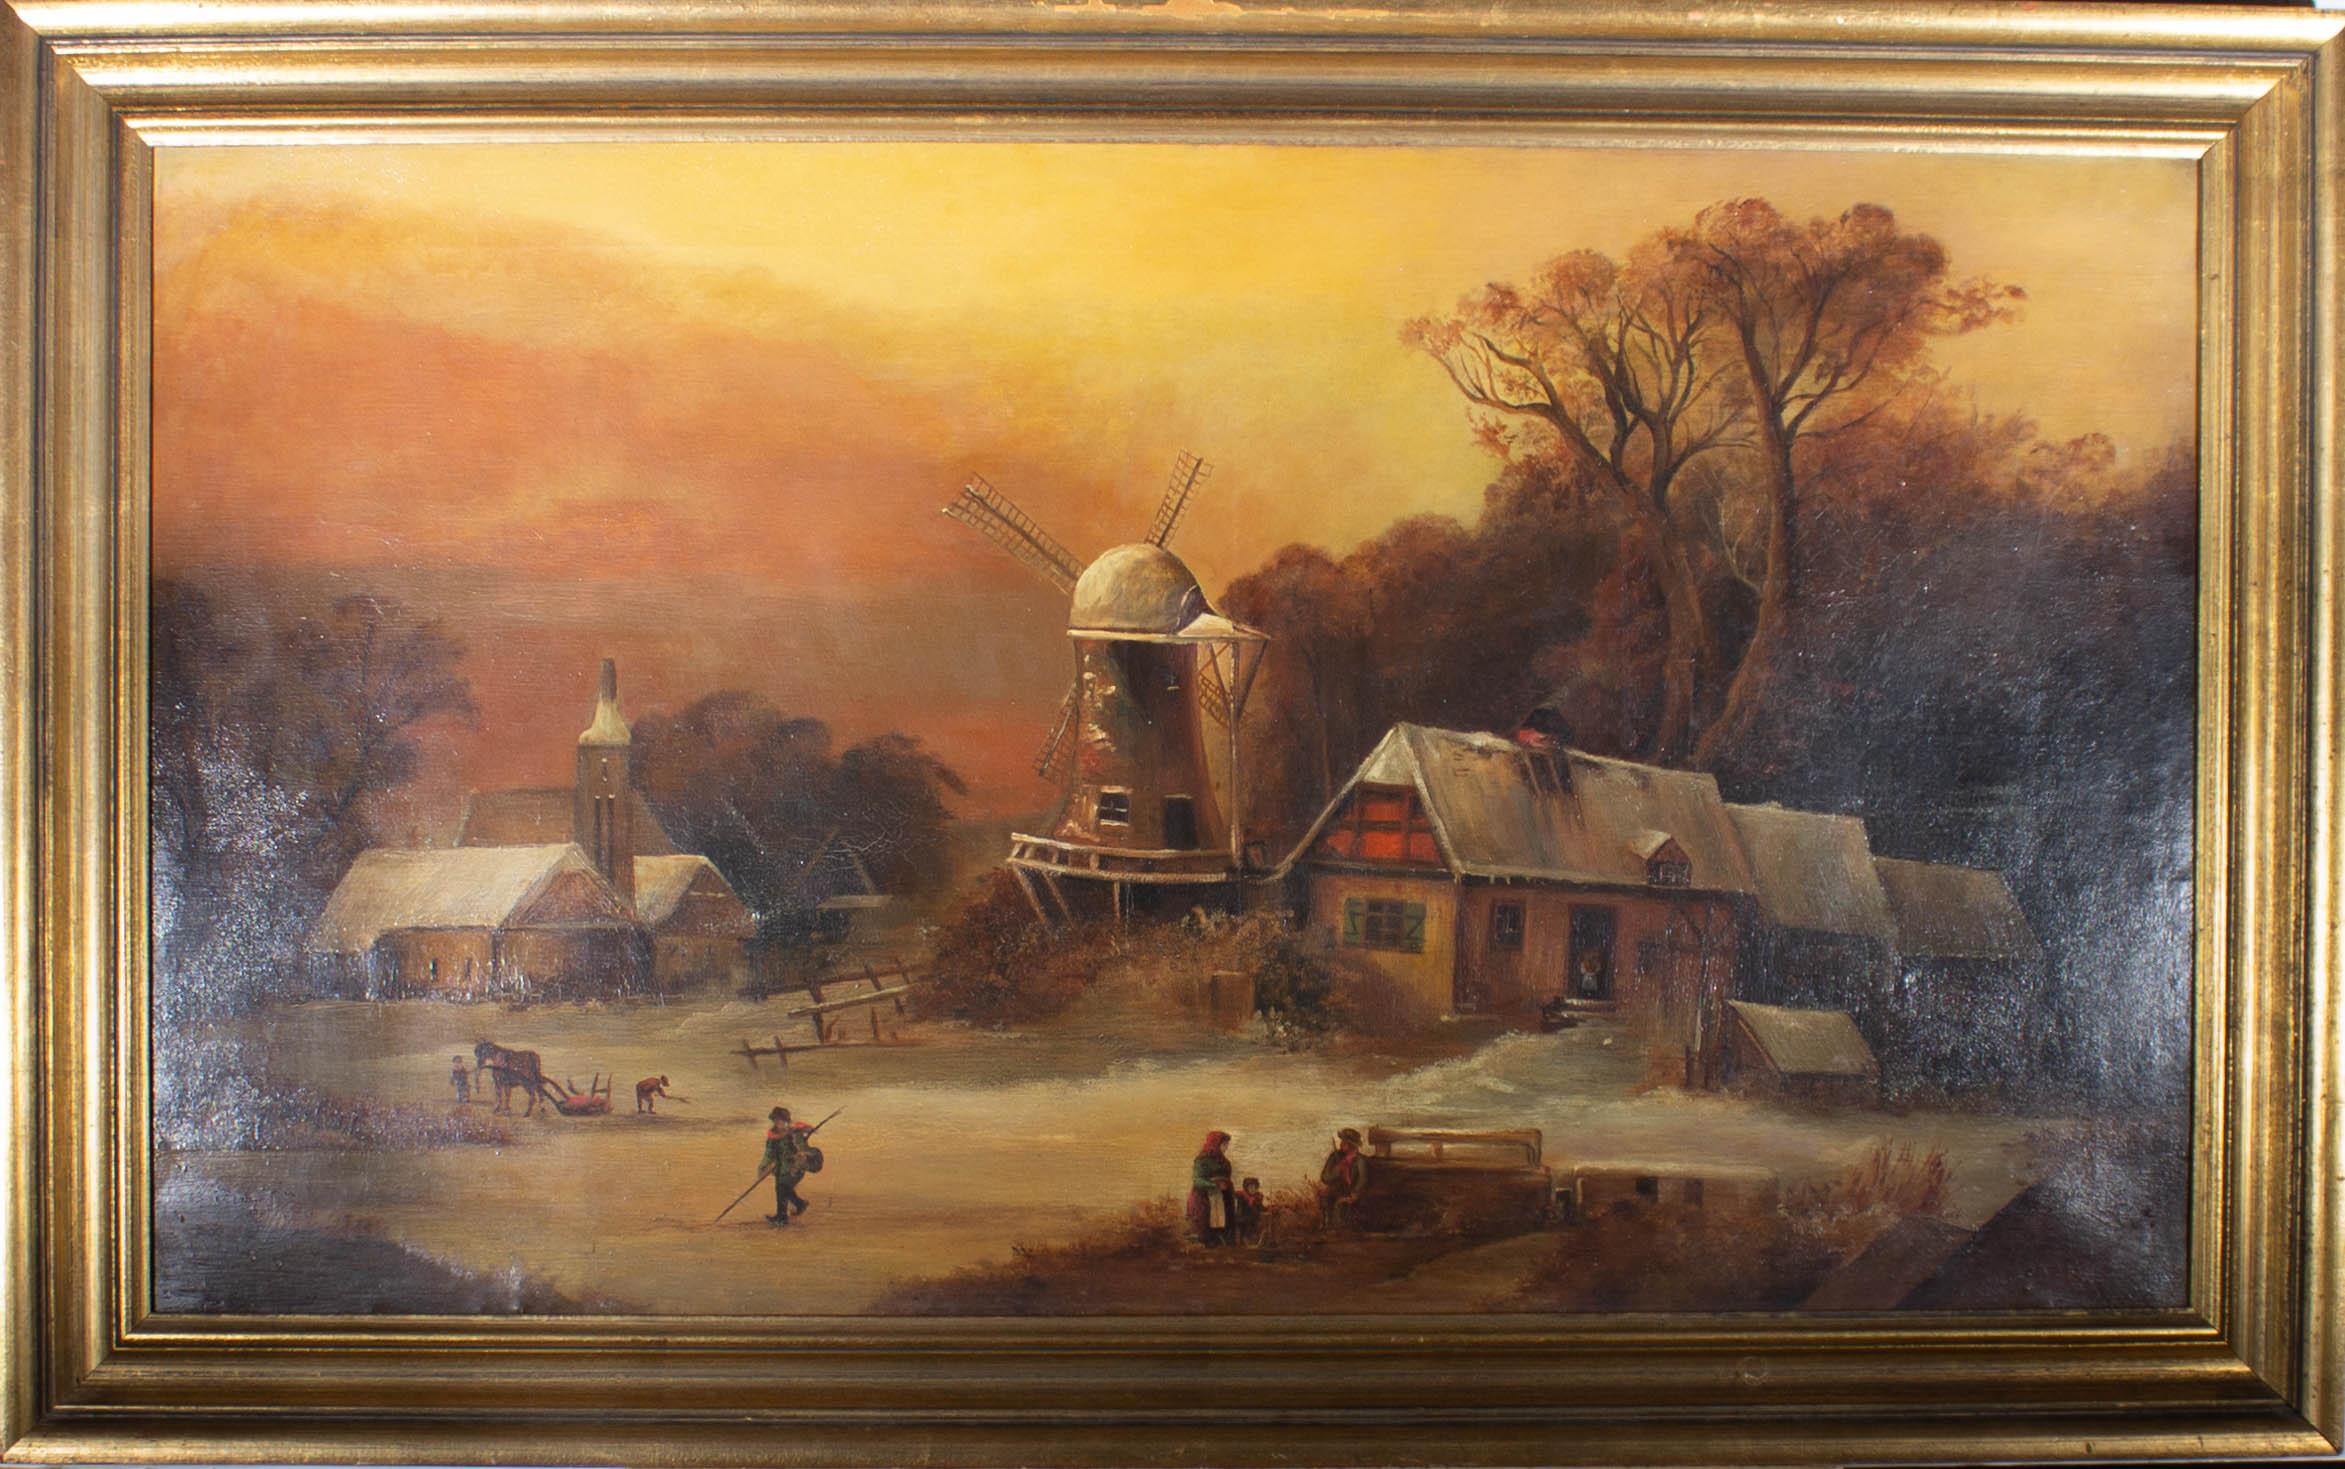 Unknown Landscape Painting - 20th Century Oil - Mid Winter